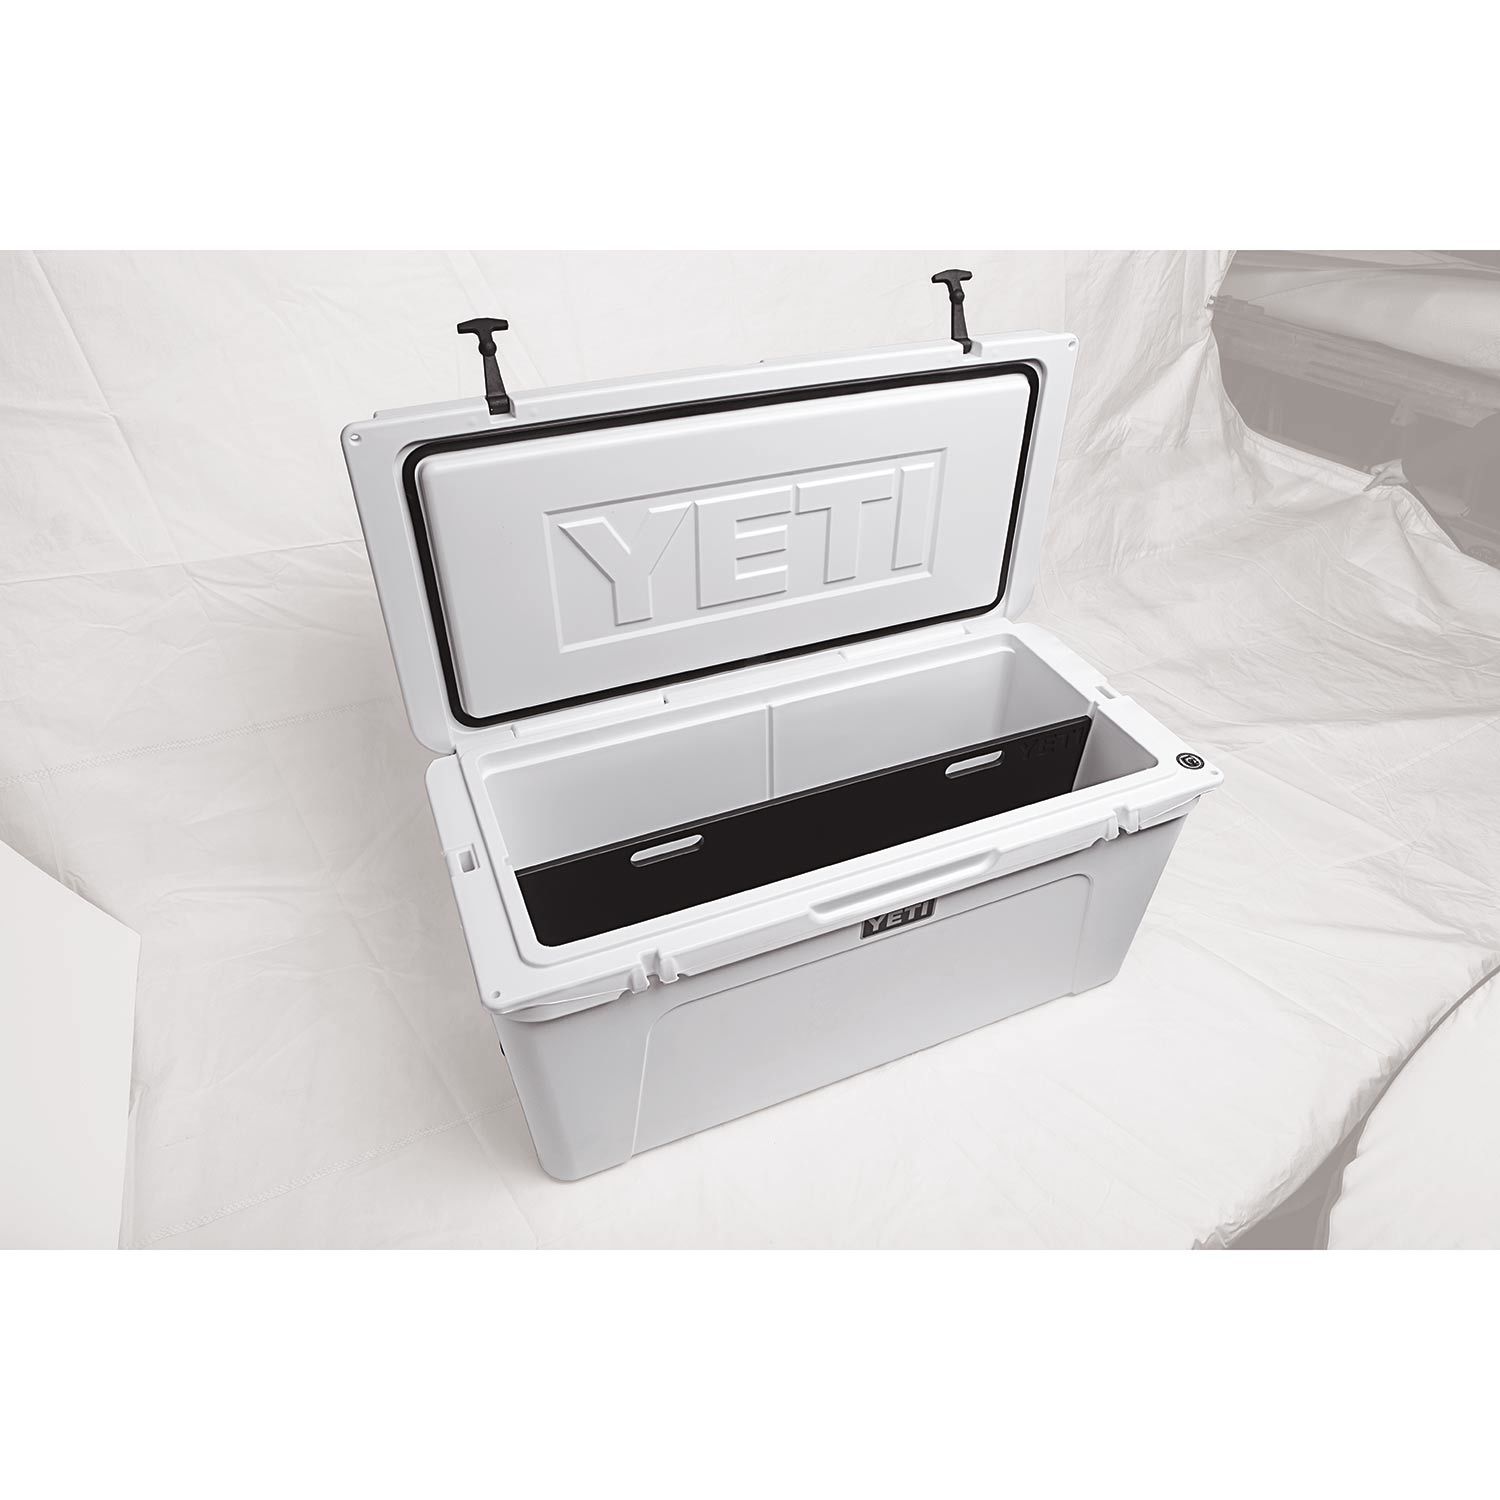 Grippi - Cooler Divider & Cutting Board Compatible with The Yeti Tundra 65 - Improved